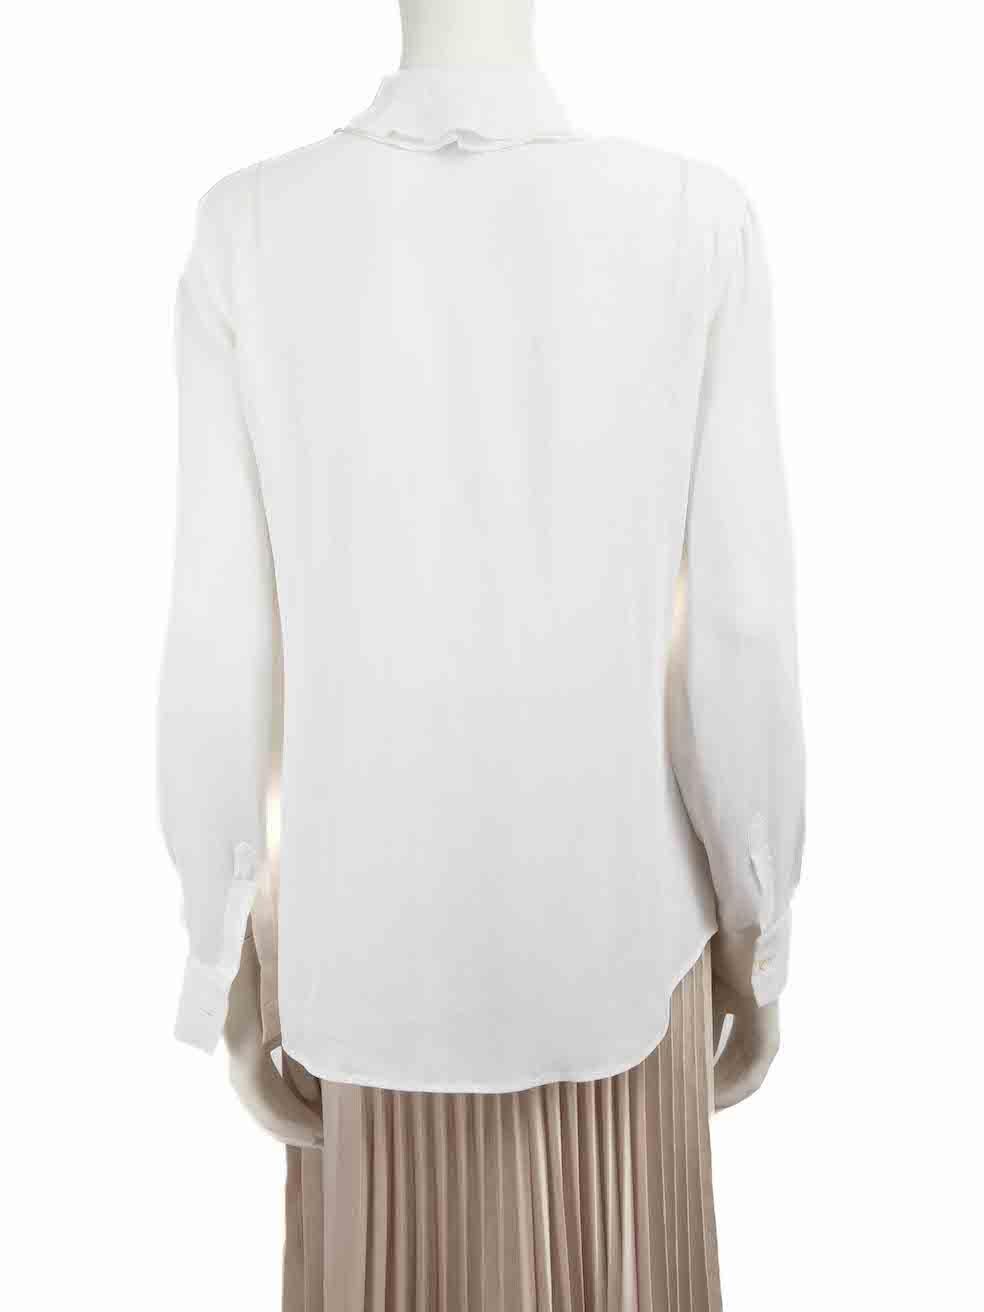 Moschino Moschino Boutique White Ruffled Long Sleeve Blouse Size L In Good Condition For Sale In London, GB